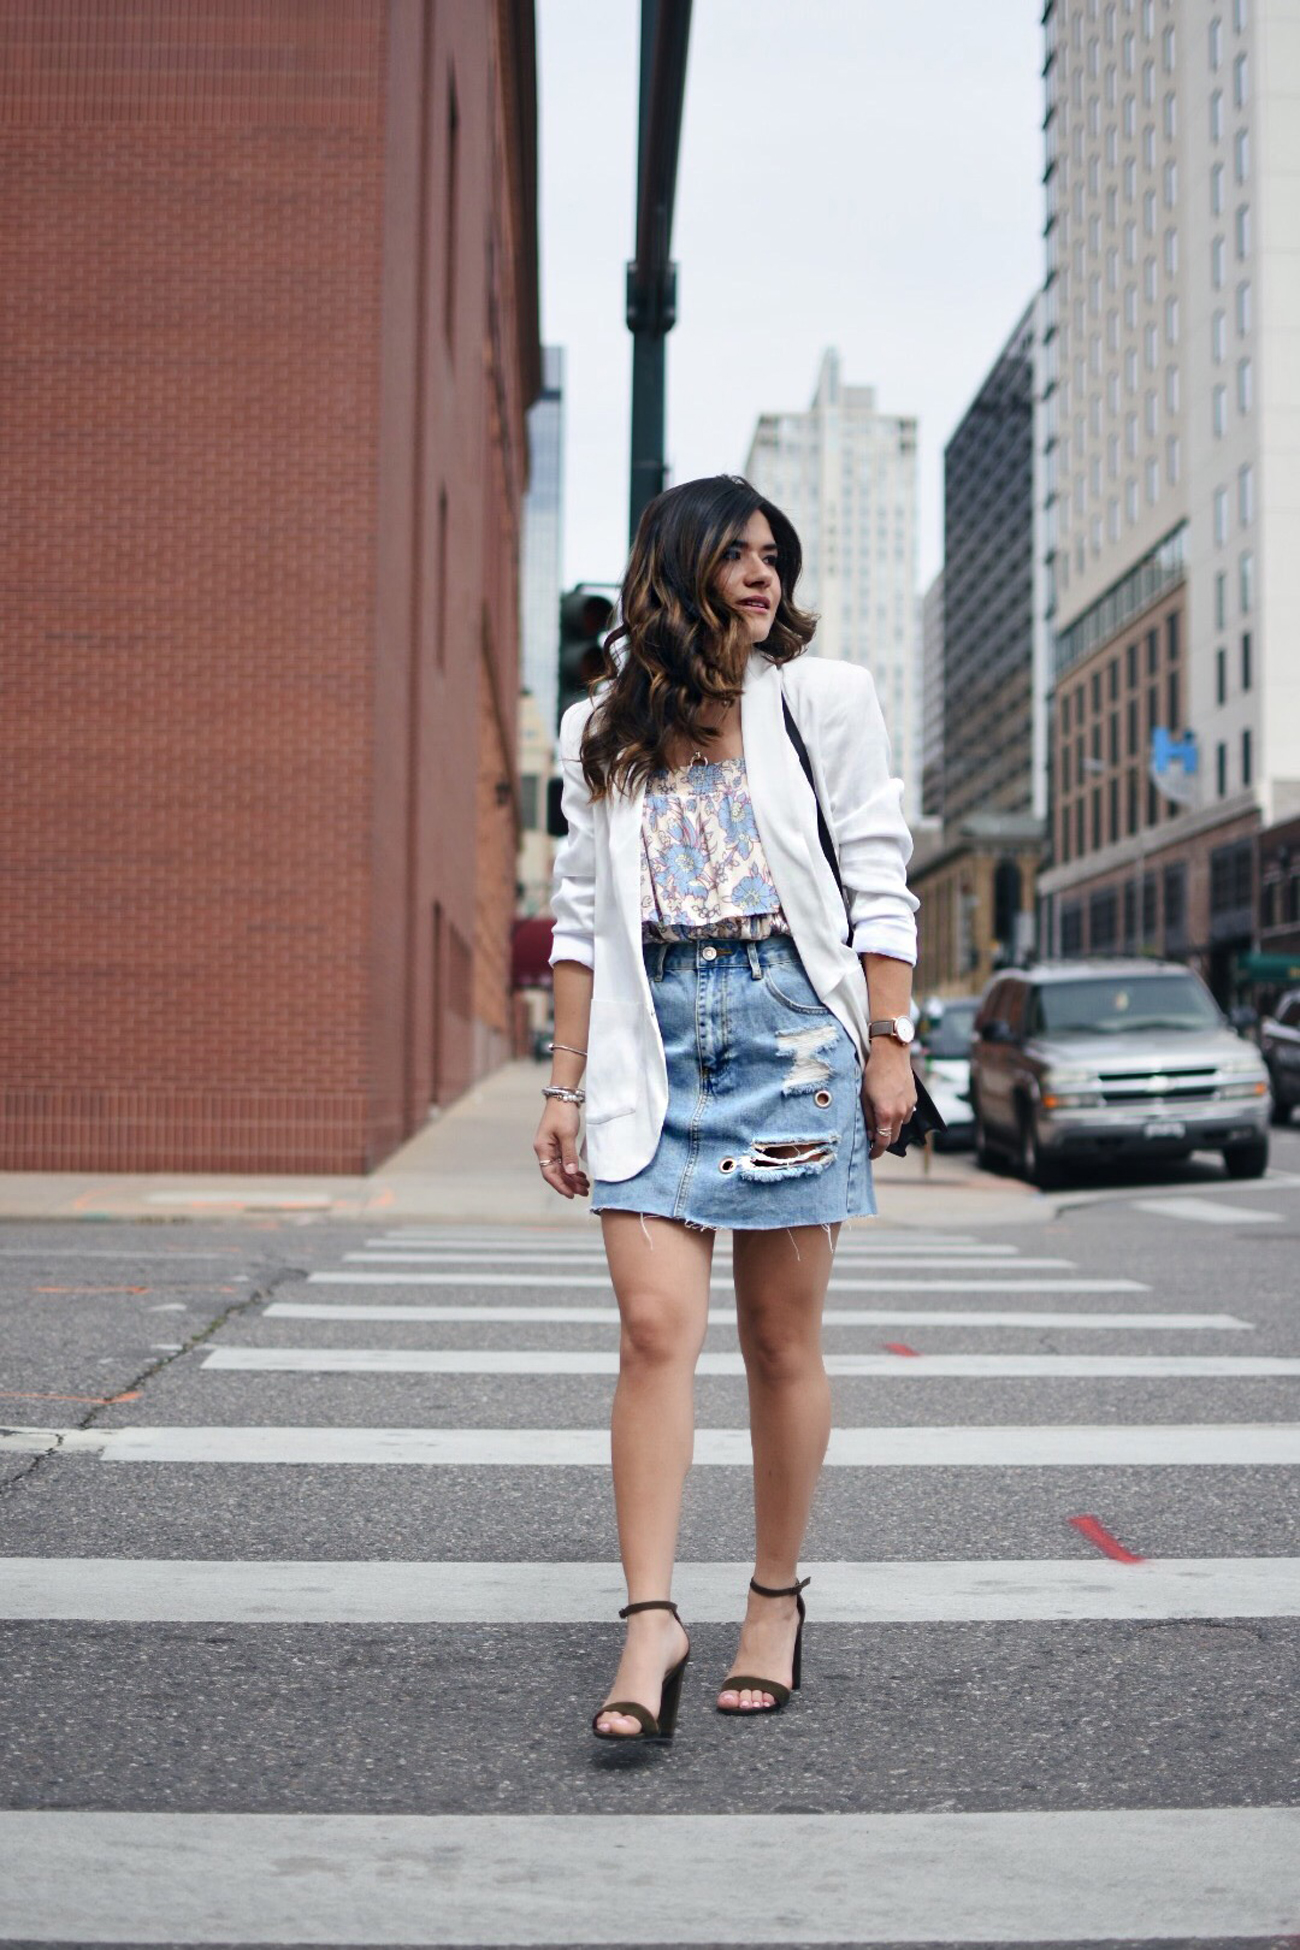 Carolina Hellal of Chic Talk wearing a Forever 21 denim mini skirt, Patterns and pops floral top, Thacker white blazer and Rebecca Minkoff black bag. 